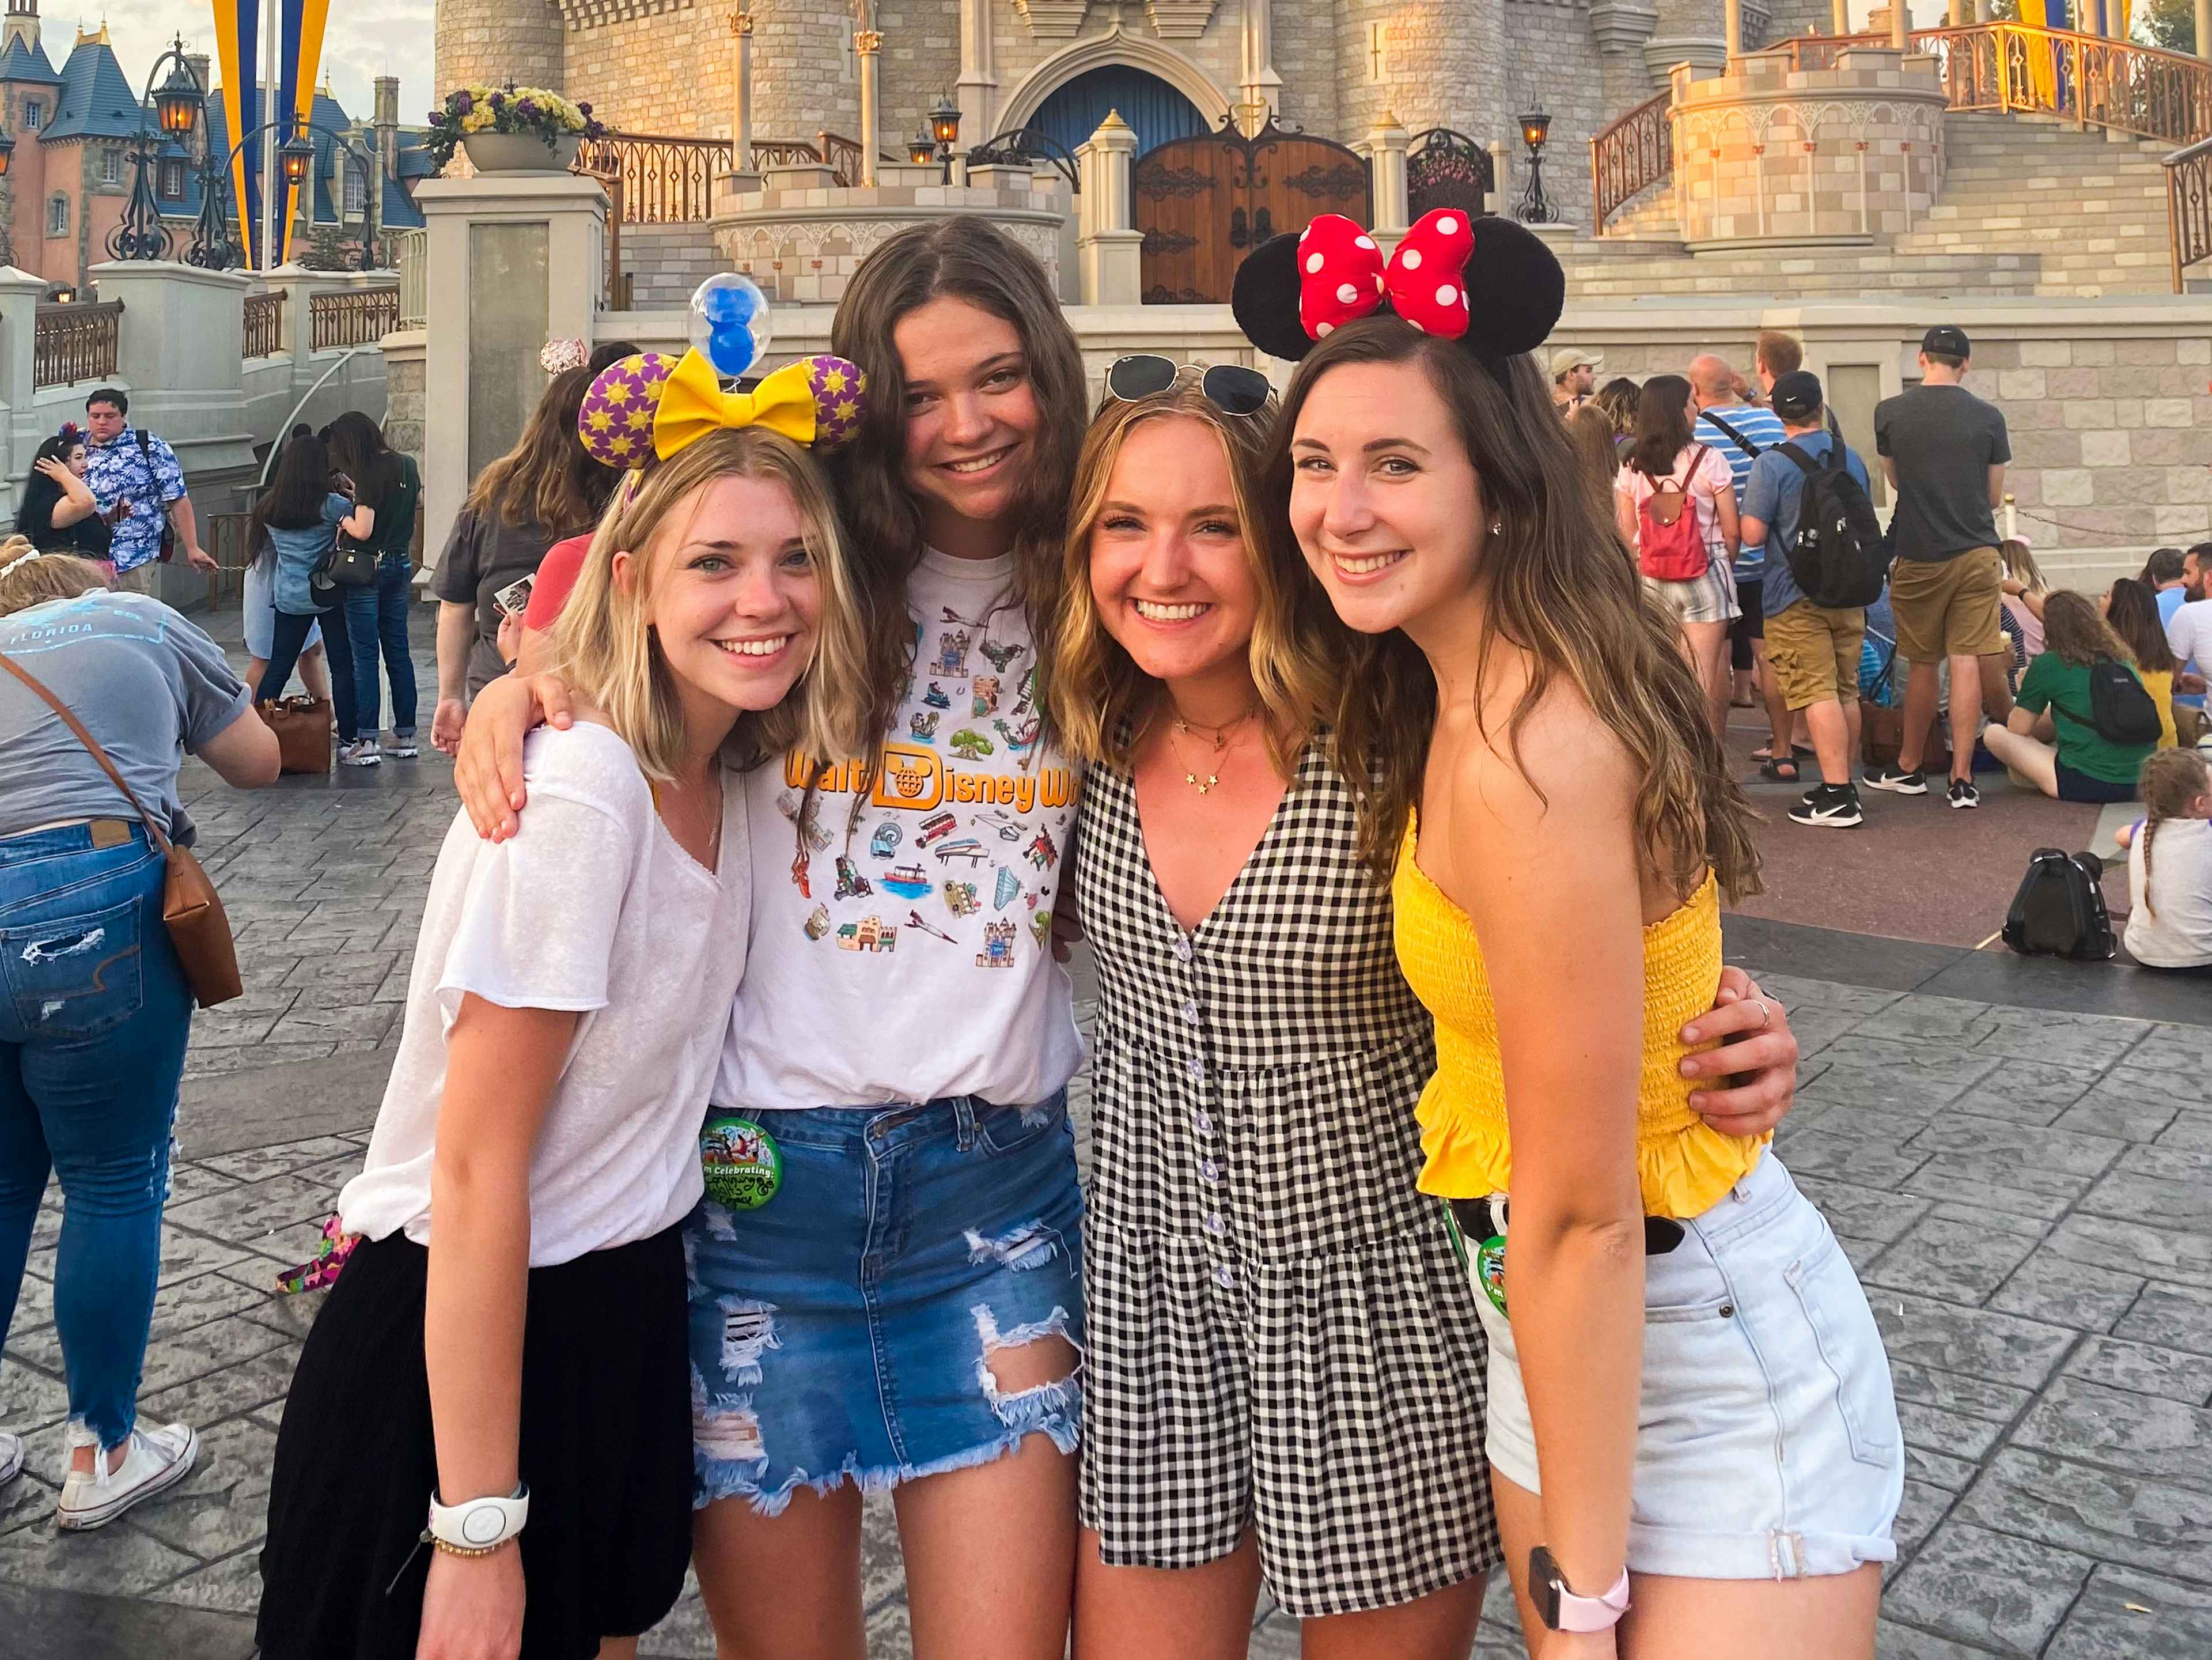 four friends hugging each other in front of the magic kingdom castle at disney world